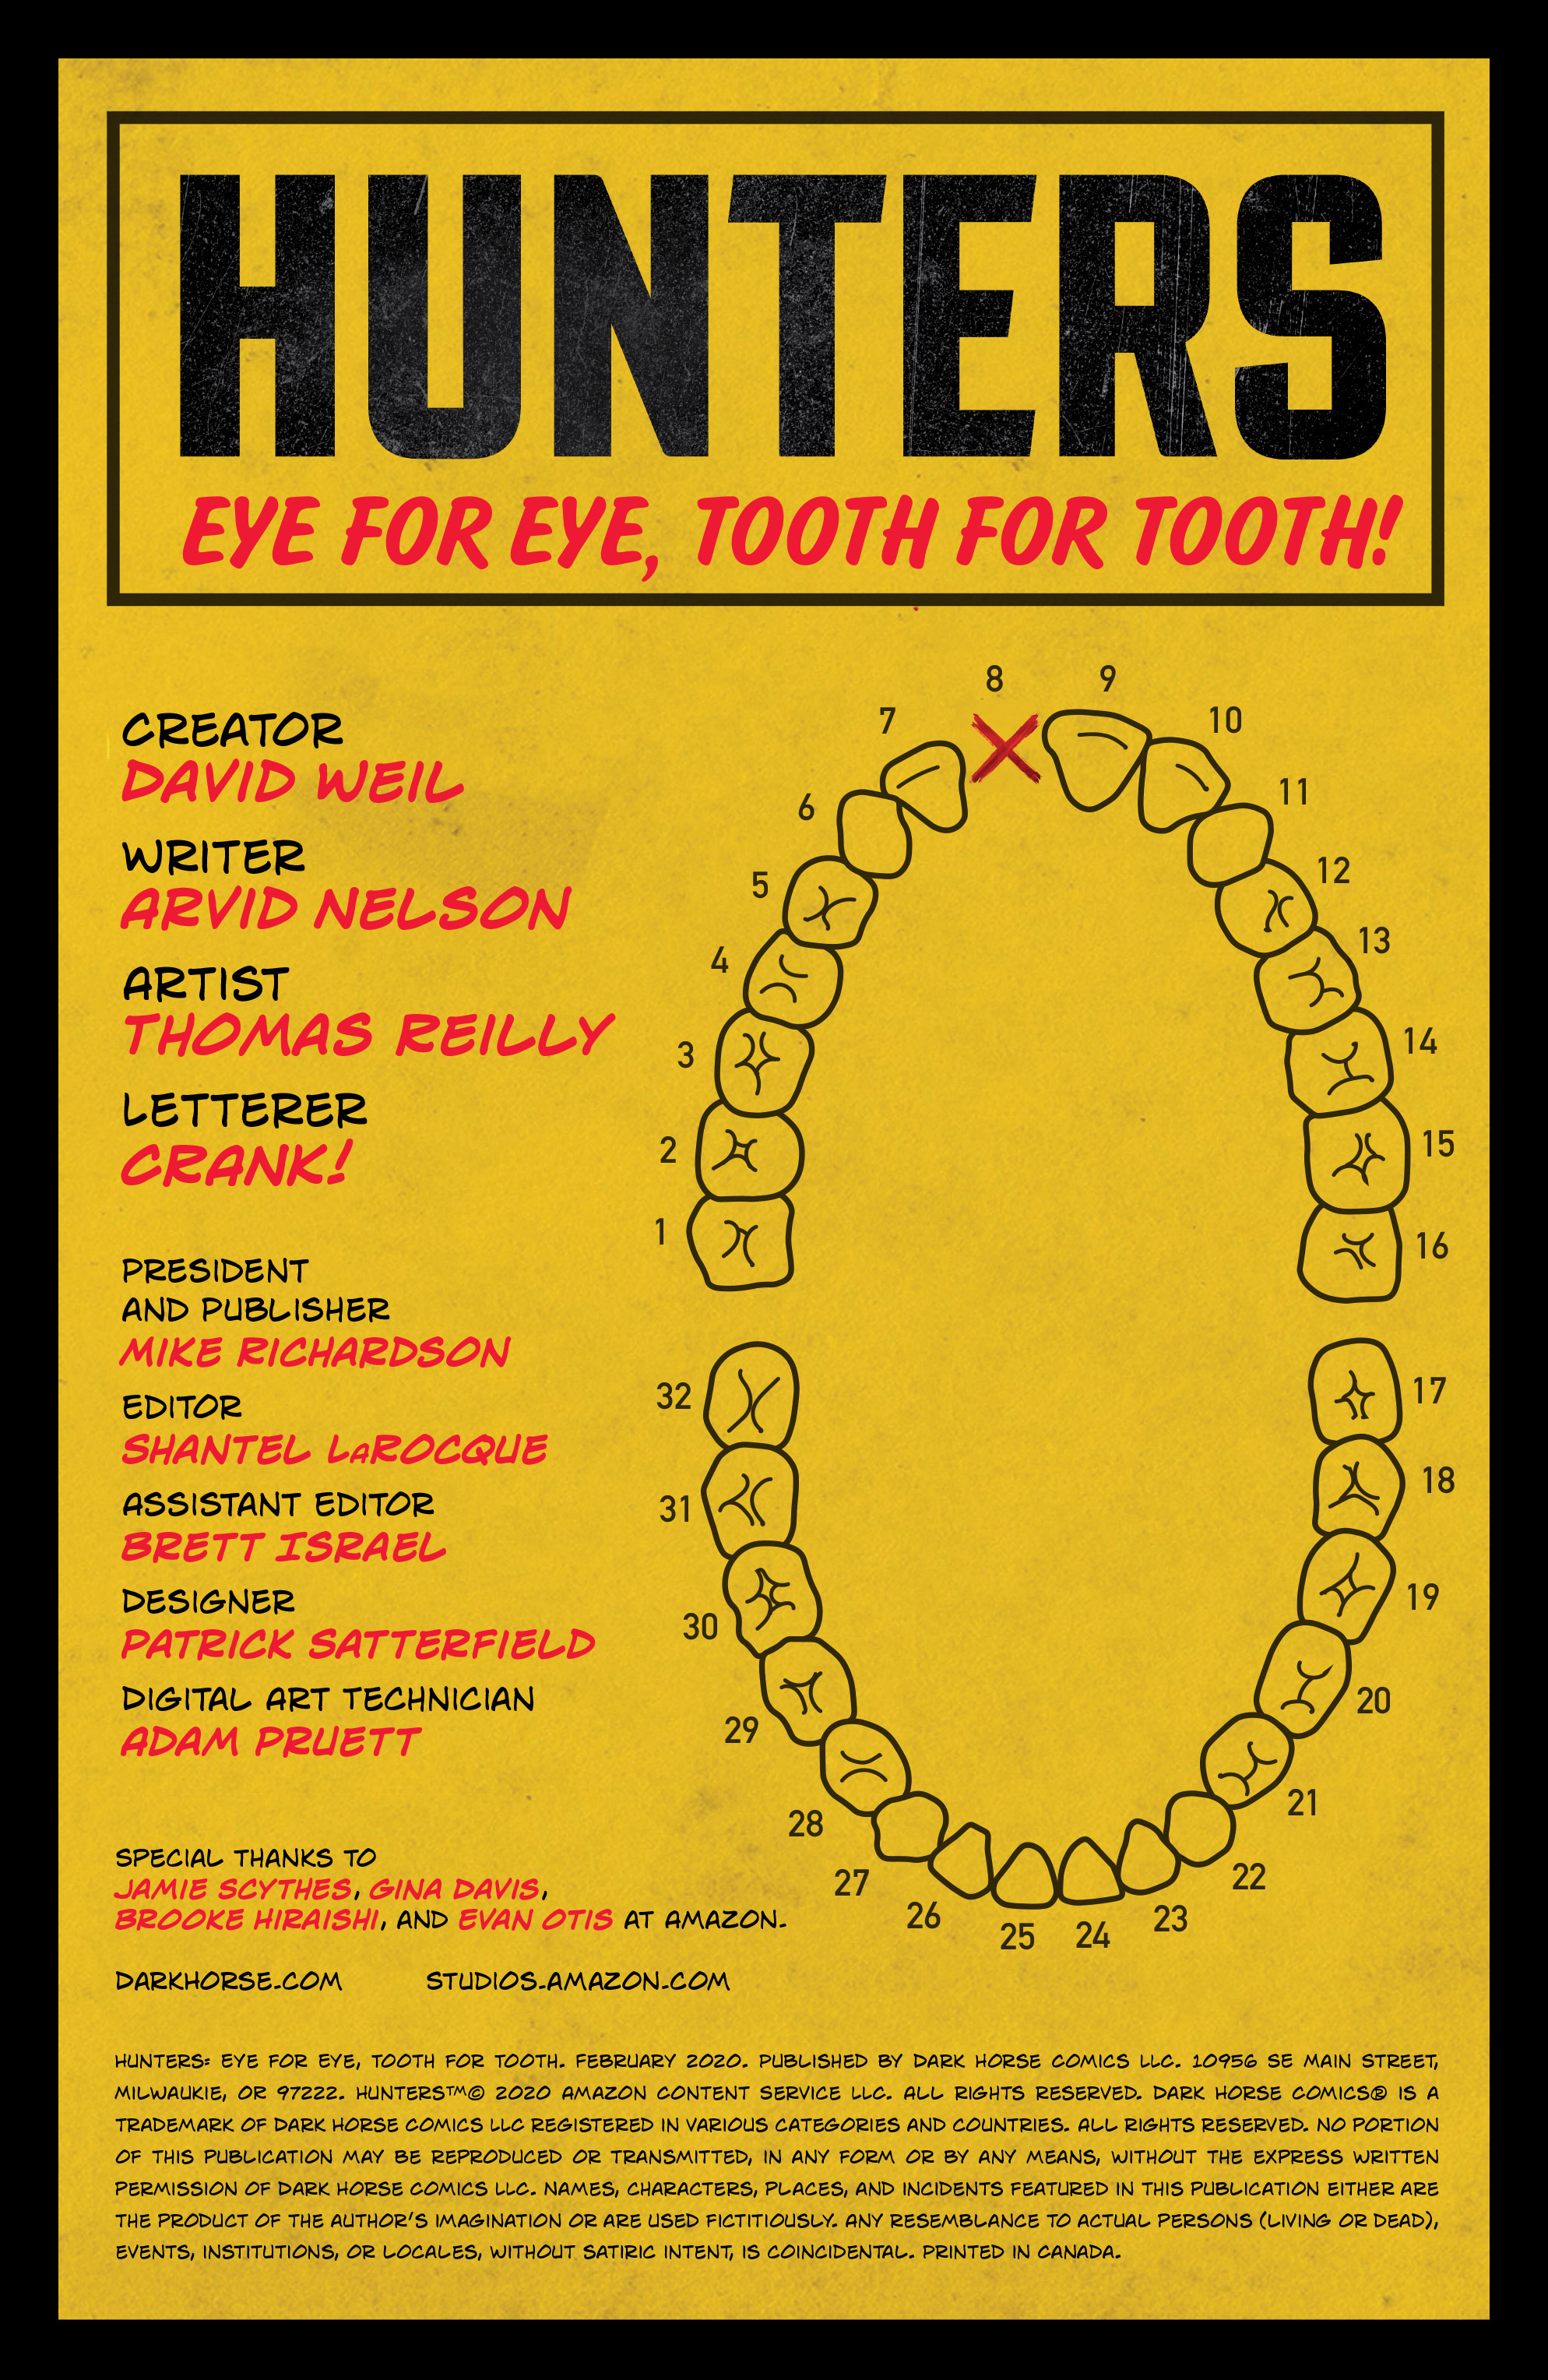 Read online Hunters: Eye for Eye, Tooth for Tooth comic -  Issue # Full - 2